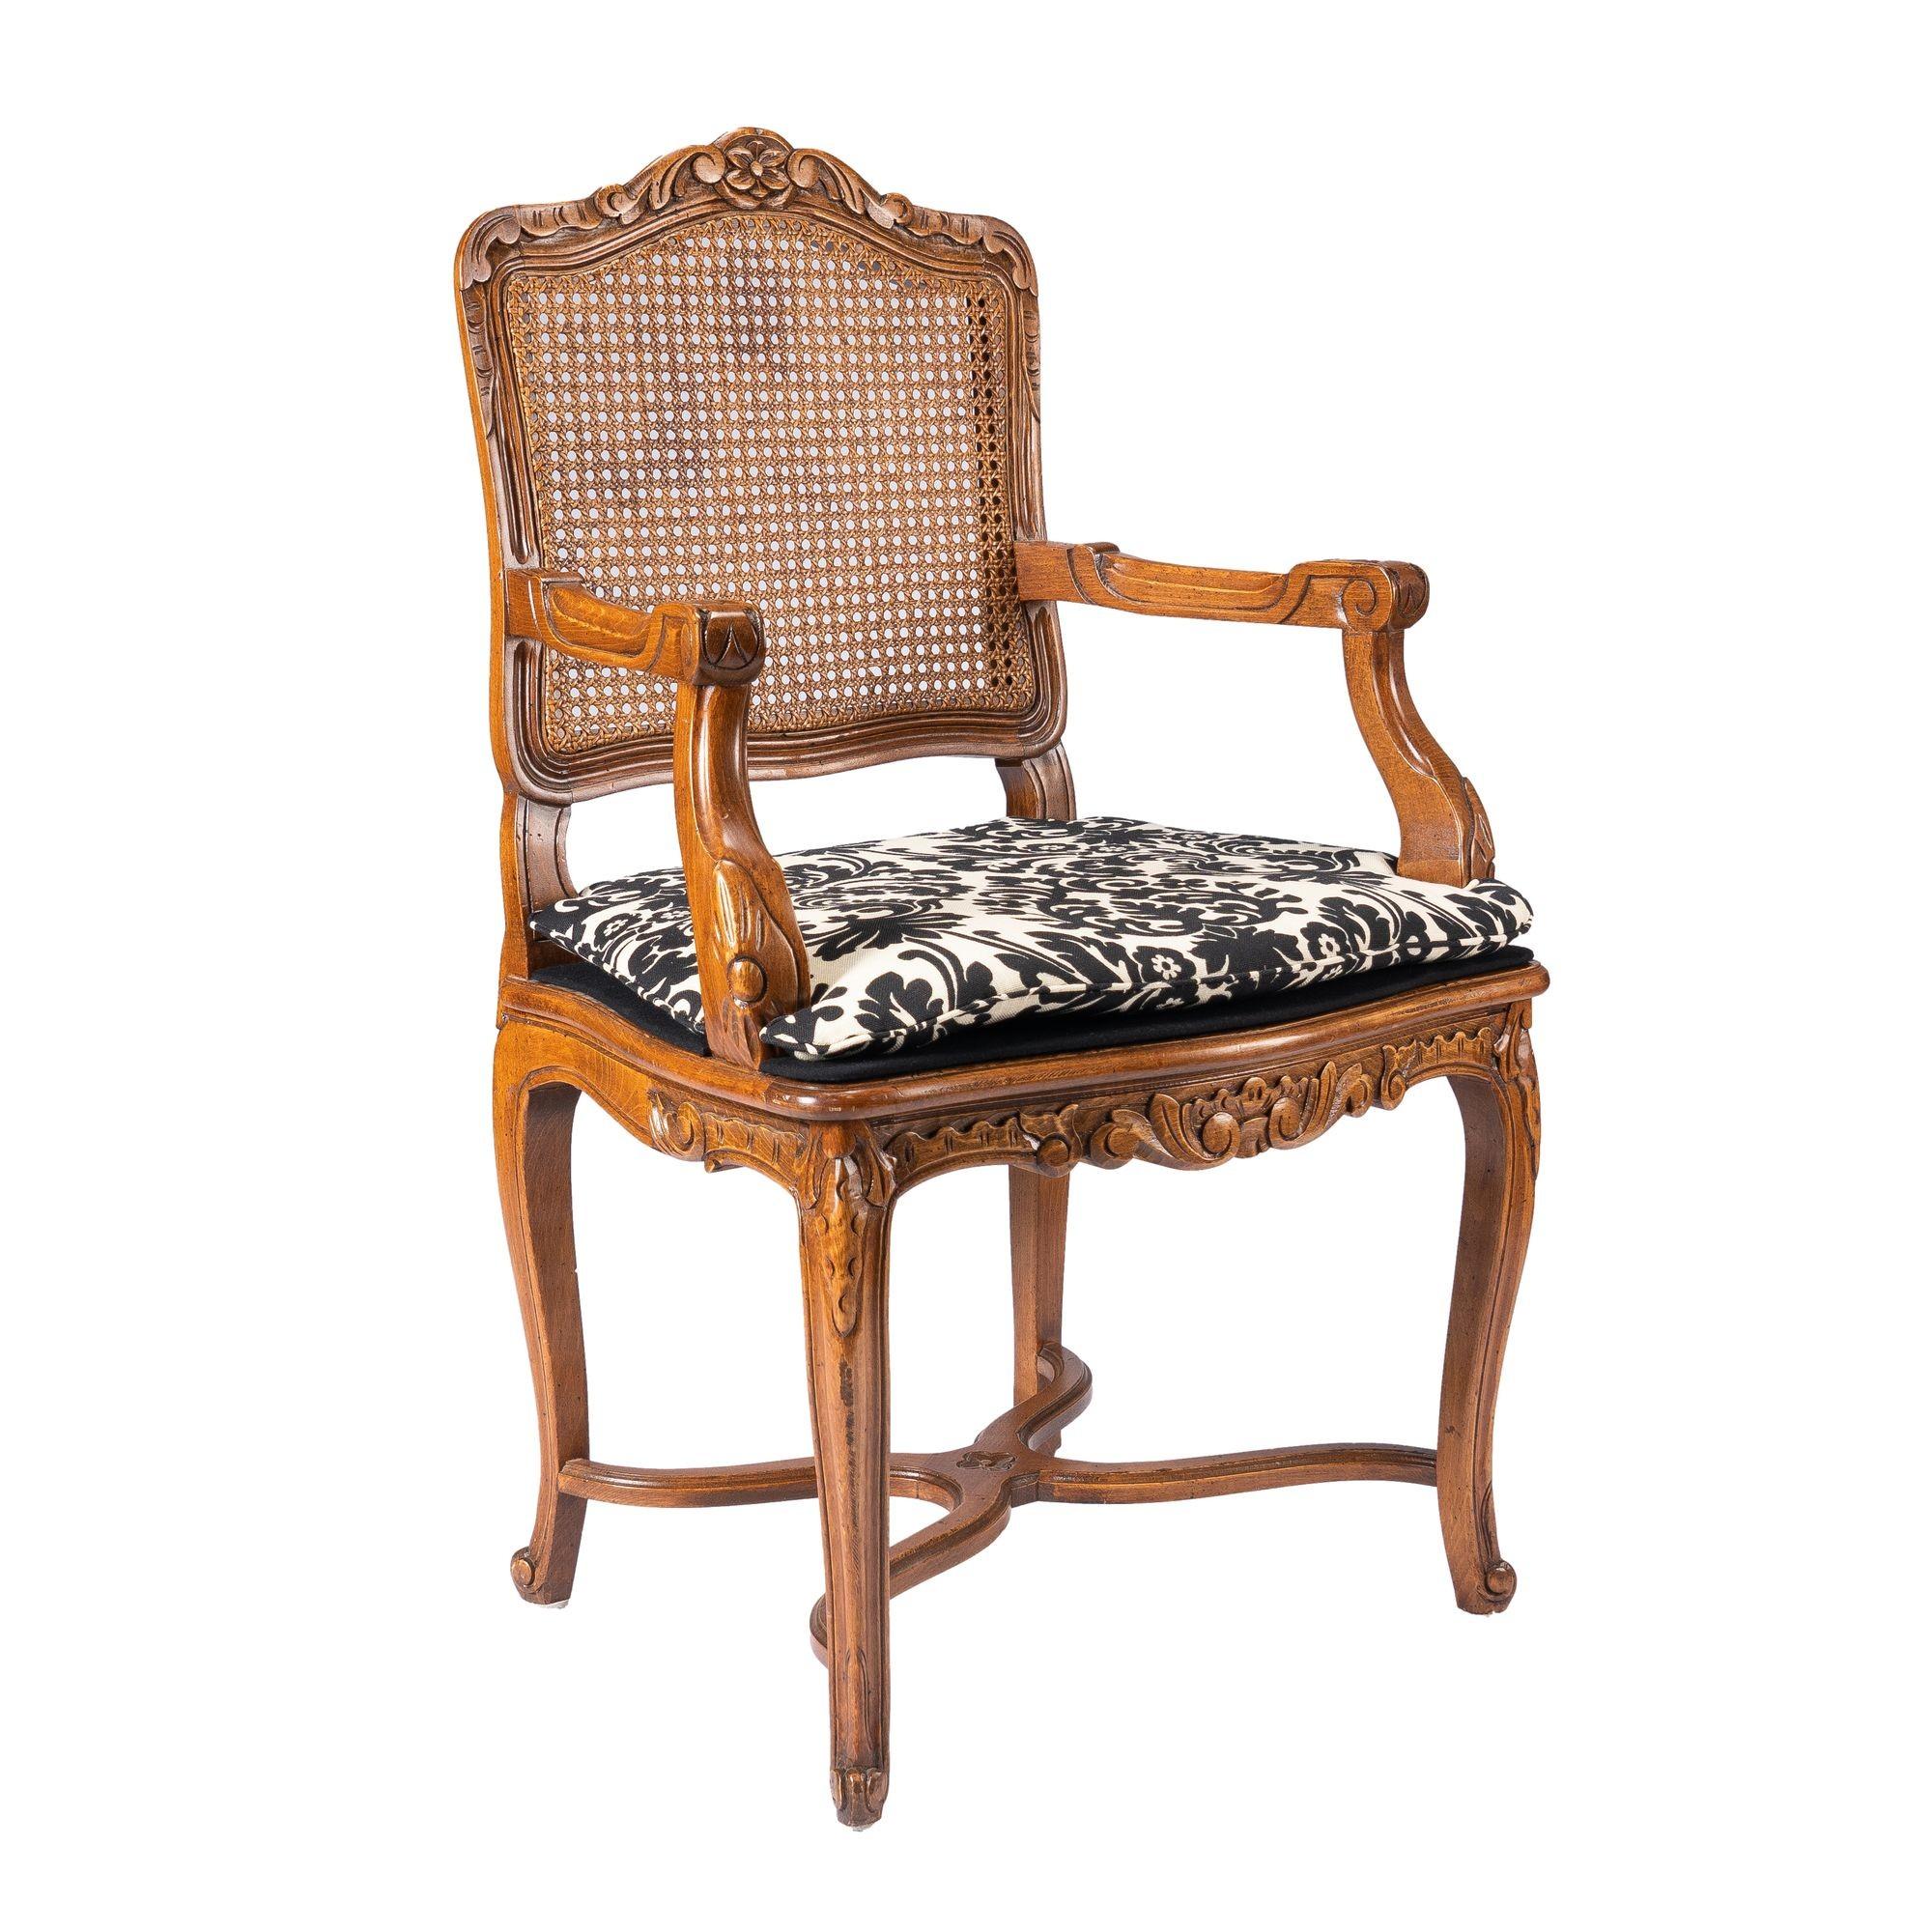 French Louis XVl style fauteuil, c. 1900's For Sale 2